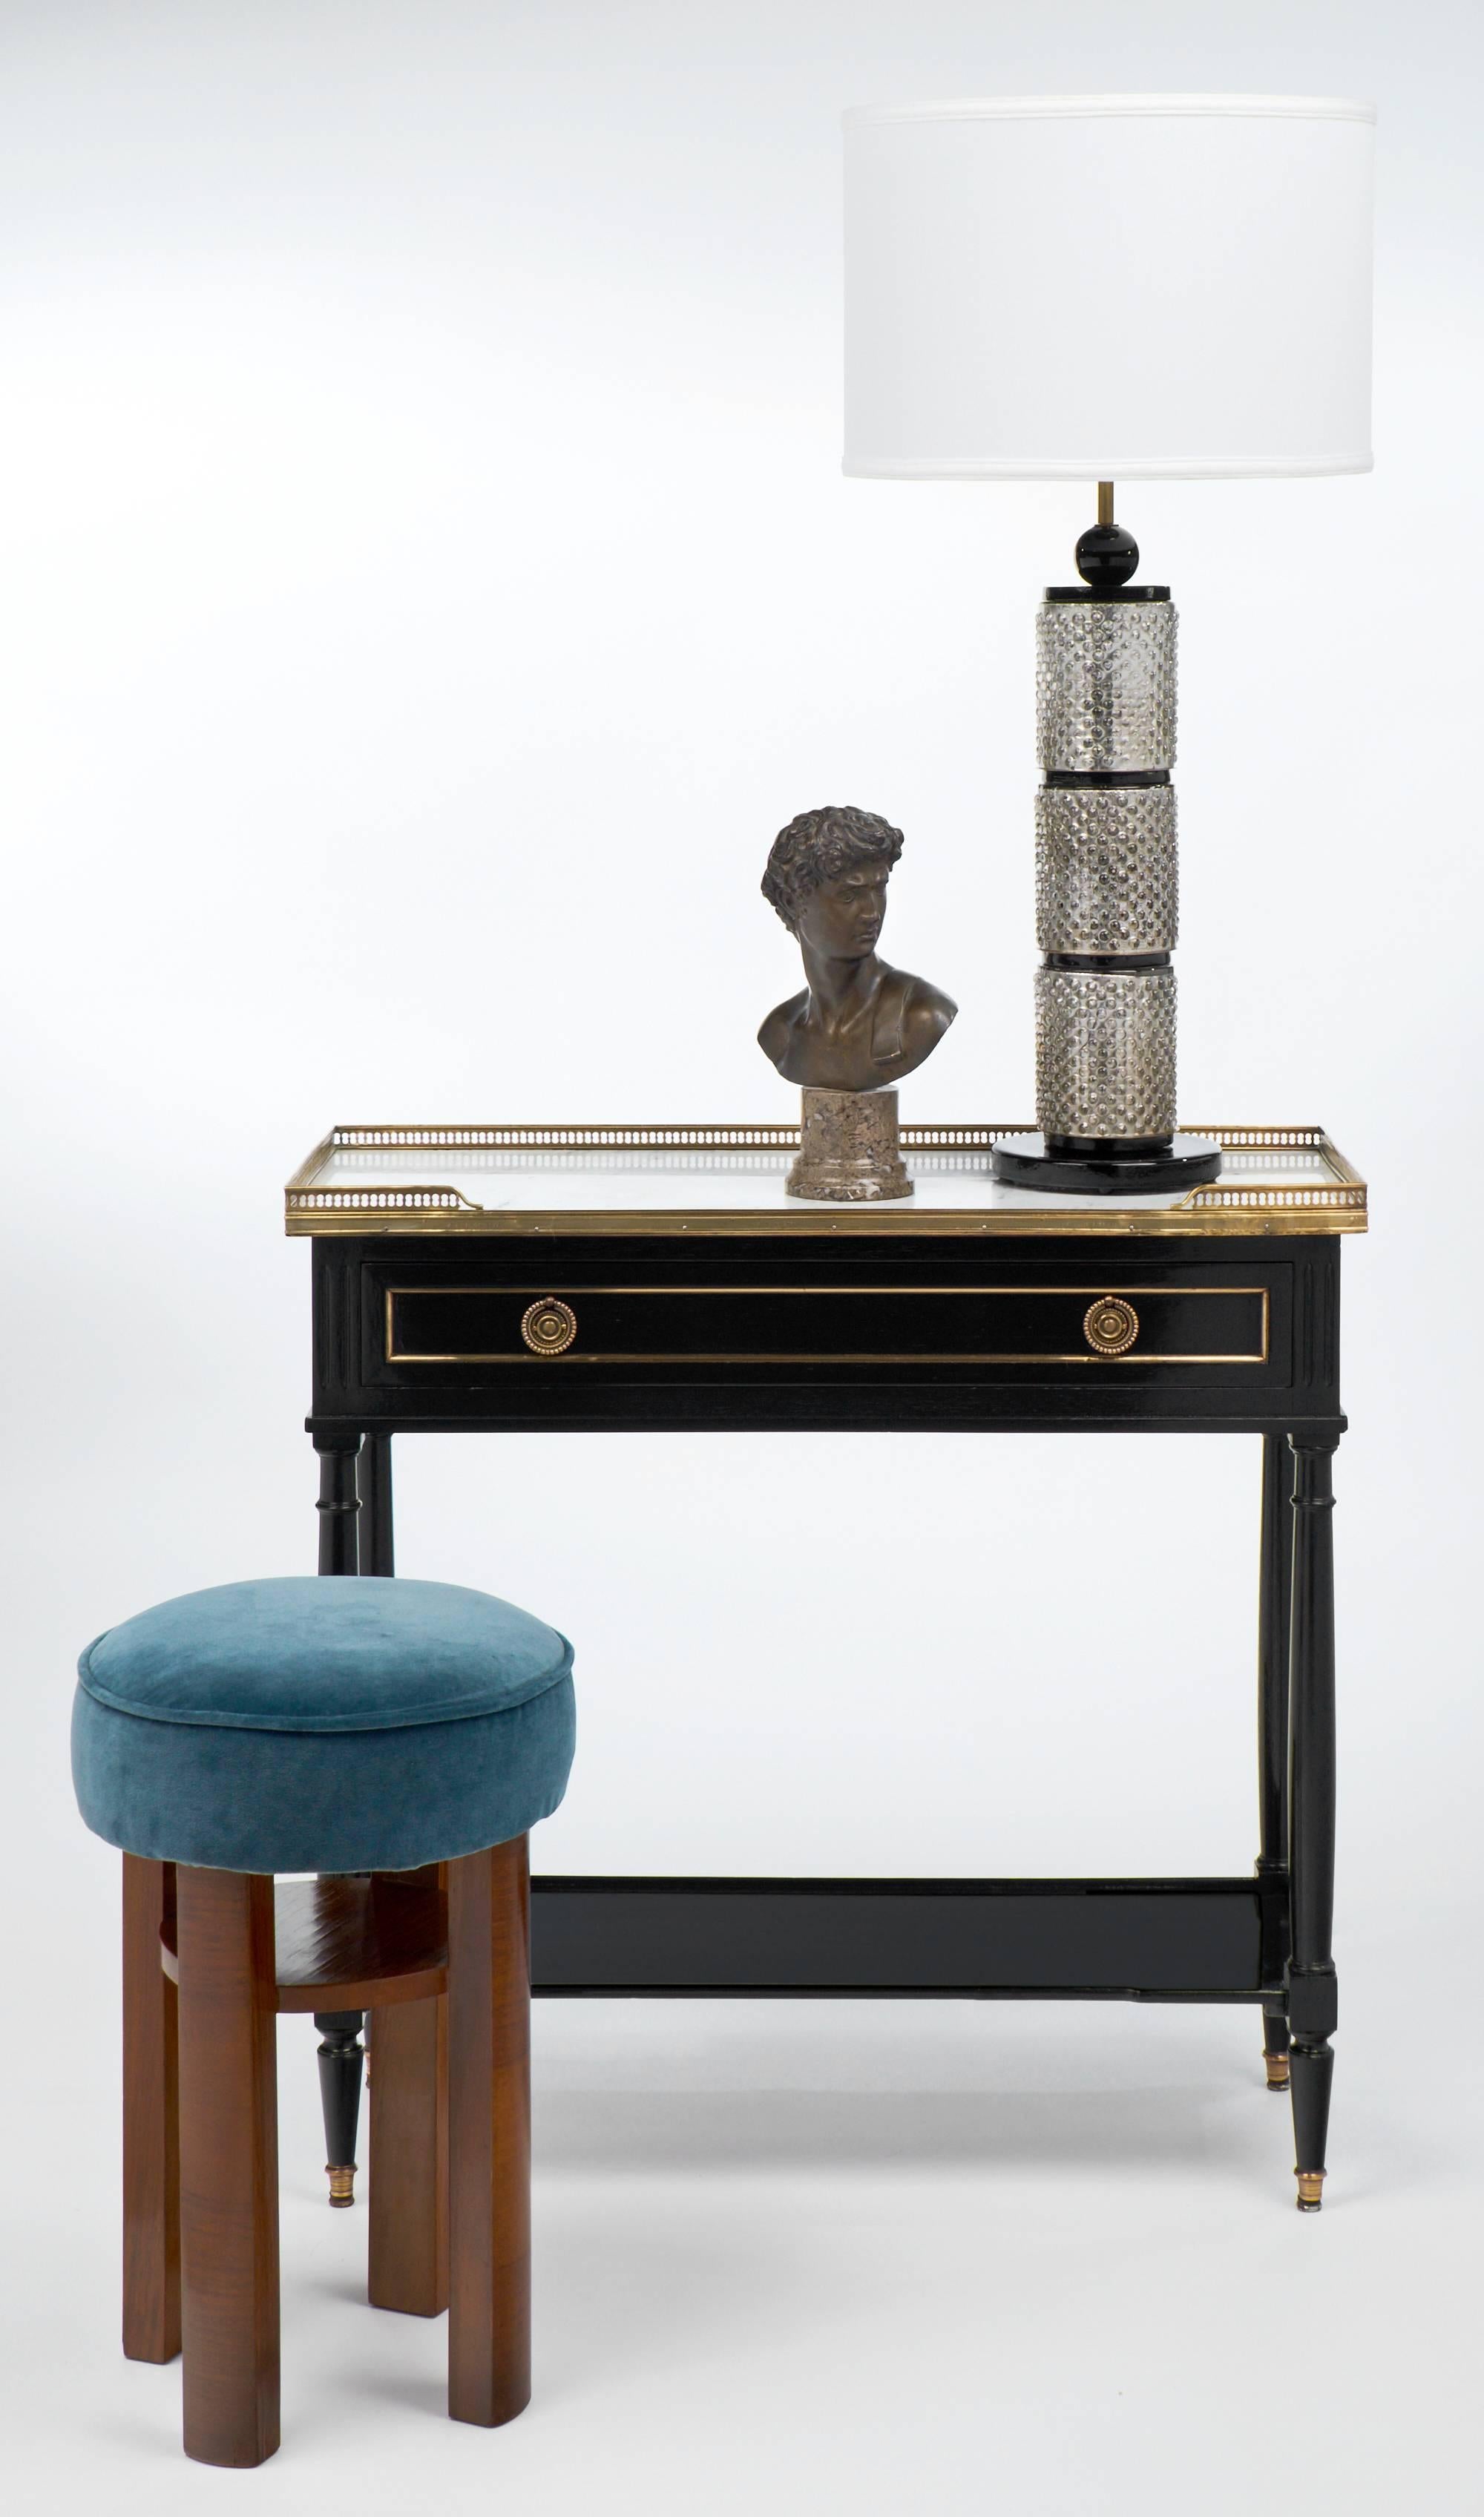 Antique French Louis XVI style console table or end table of ebonized mahogany with a hand-rubbed French polish finish, brass trim, and Carrara marble top. A long, dovetailed drawer with bronze pulls, and a bottom shelf for open storage or display.